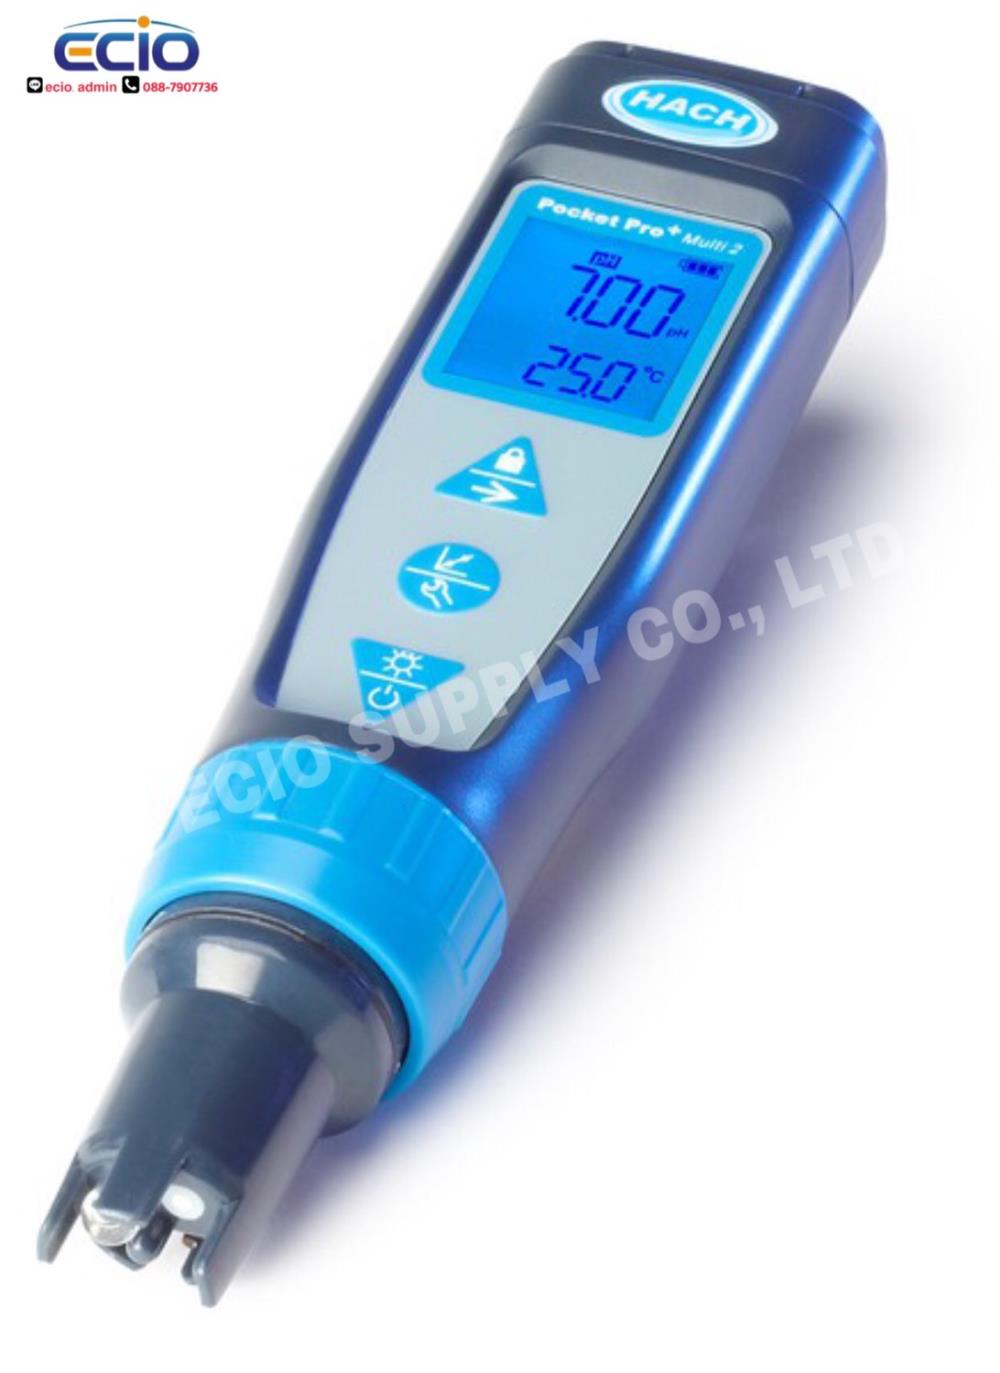 HACH Pocket Pro+ Multi 2 Tester for pH/Cond/TDS/Salinity with Replaceable Sensor ตัวทดสอบค่า pH ,HACH Pocket Pro+ Multi 2 Tester for pH/Cond/TDS/Salinity with Replaceable Sensor,HACH,Instruments and Controls/Measuring Equipment